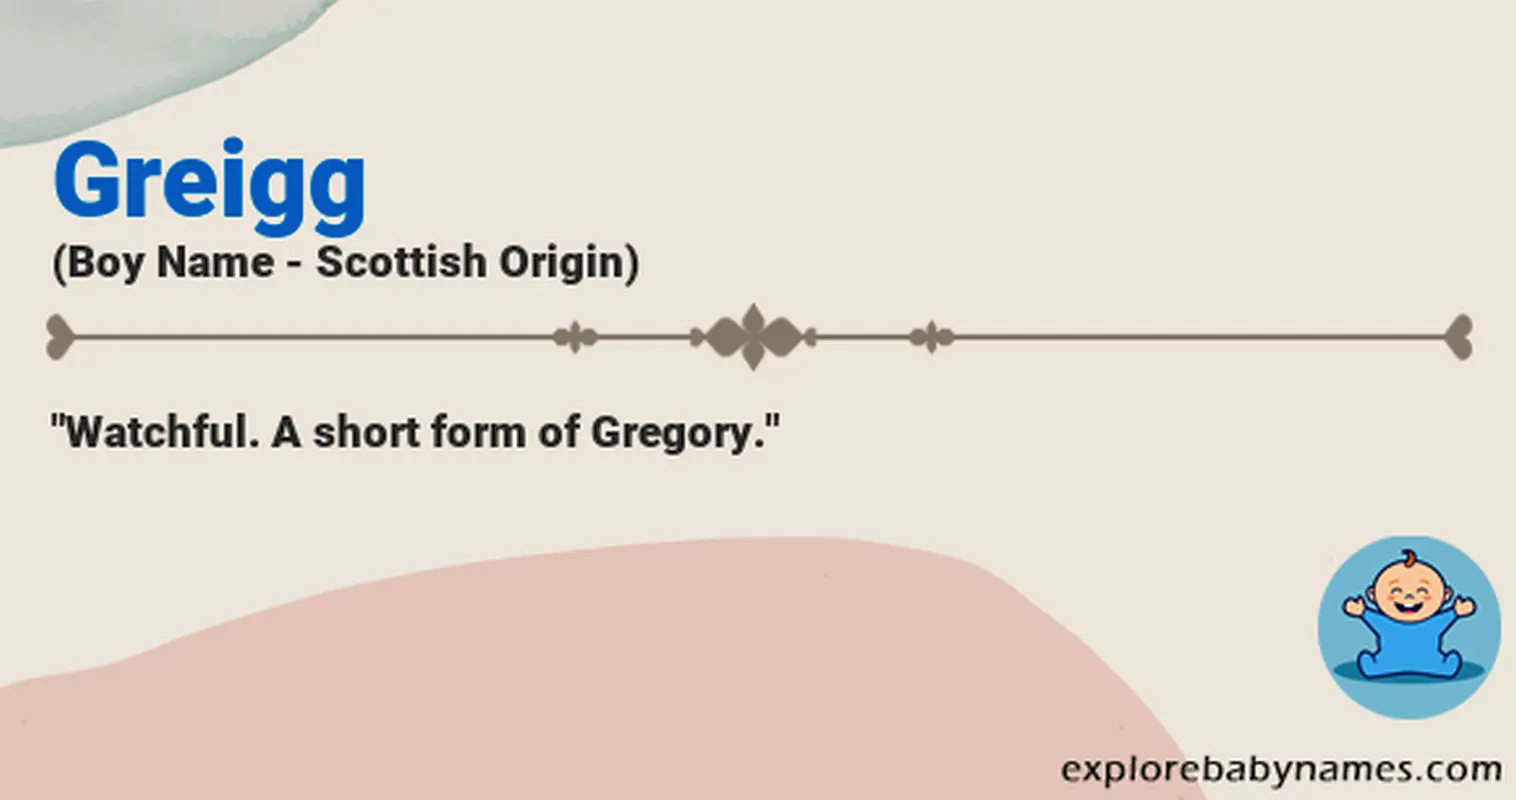 Meaning of Greigg